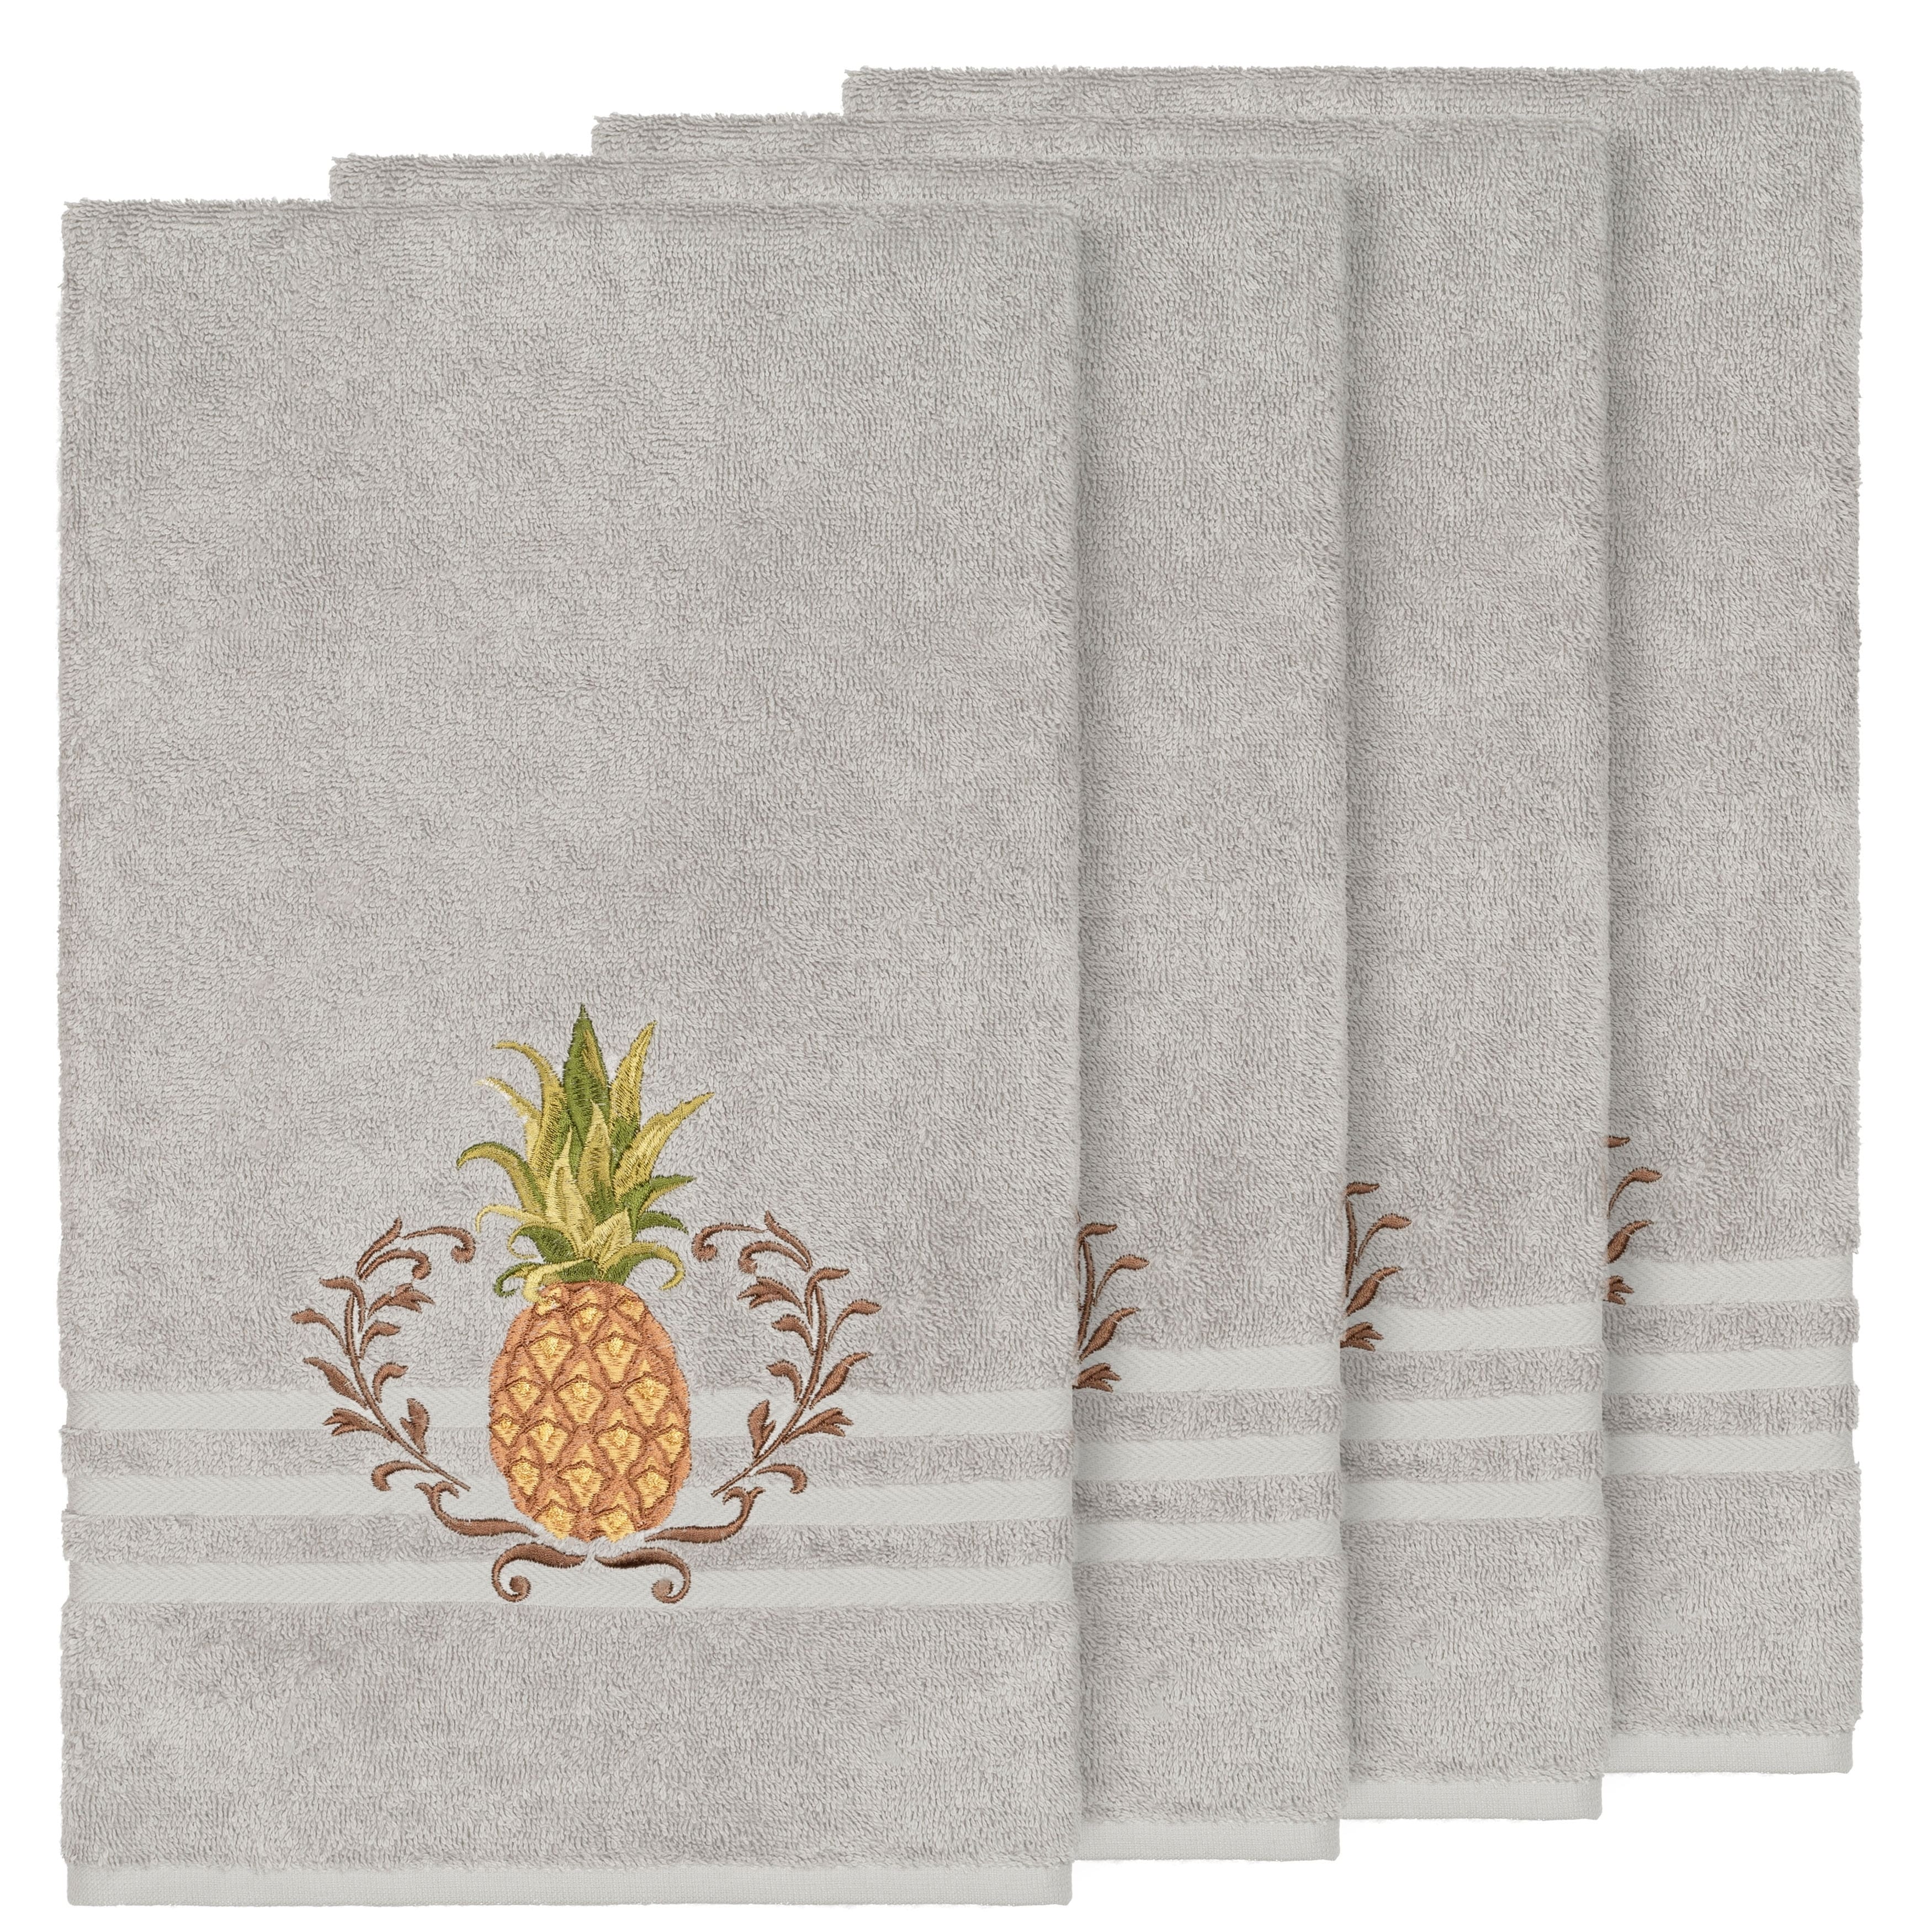 Authentic Hotel and Spa Turkish Cotton Pineapple Embroidered Light Grey 4-piece Bath Towel Set